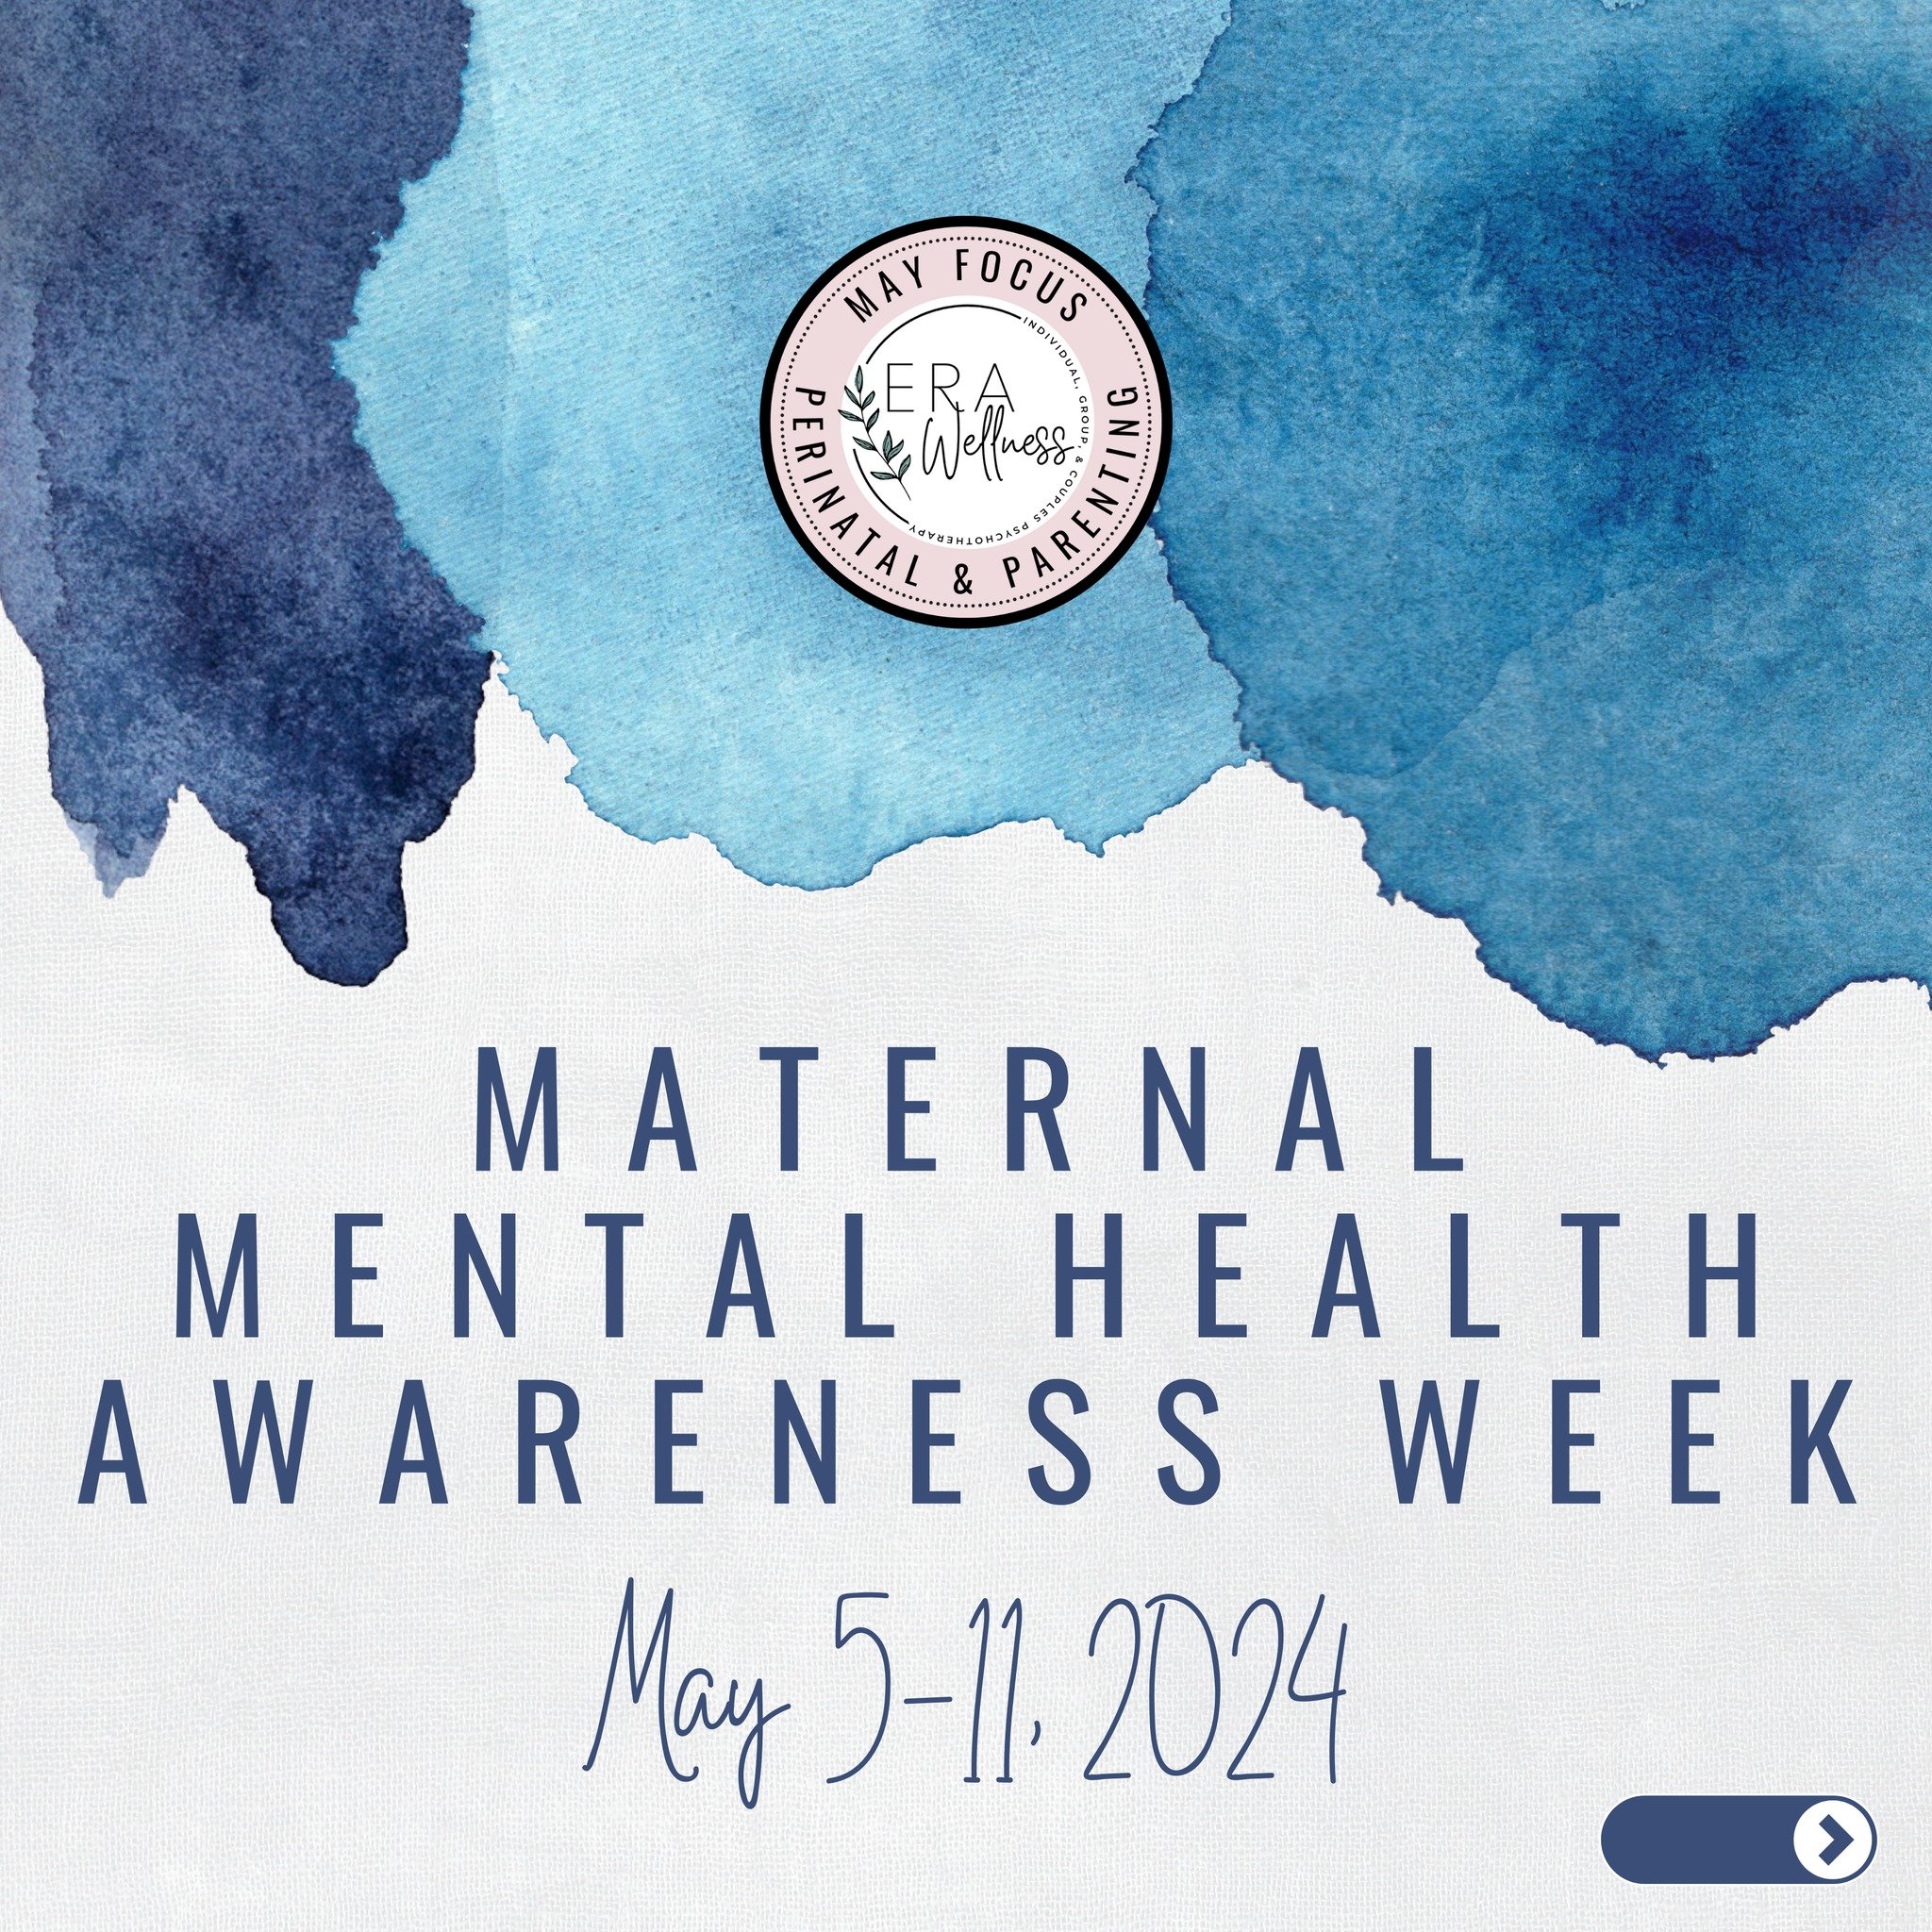 This week is Maternal Mental Health Awareness Week! We're participating in @thebluedotprj's weeklong campaign to shine a light on perinatal mental health with action to take every day. The theme this year is &quot;Storytelling Saves Lives&quot;, high